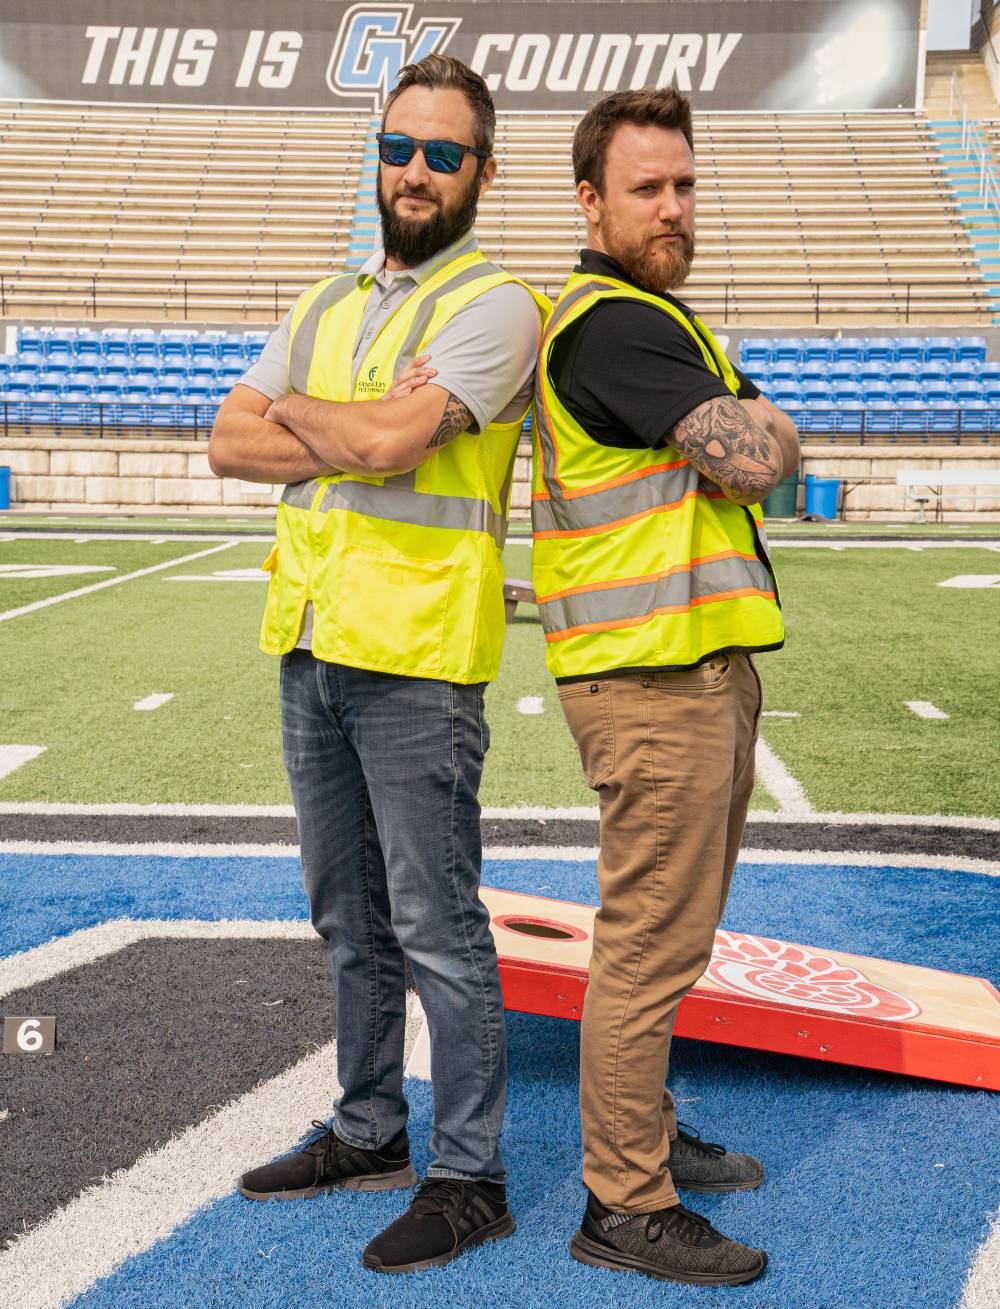 Jake Mallekoote and Matt DeRuiter standing back to back with their arms crossed, wearing construction vests and looking seriously into the camera